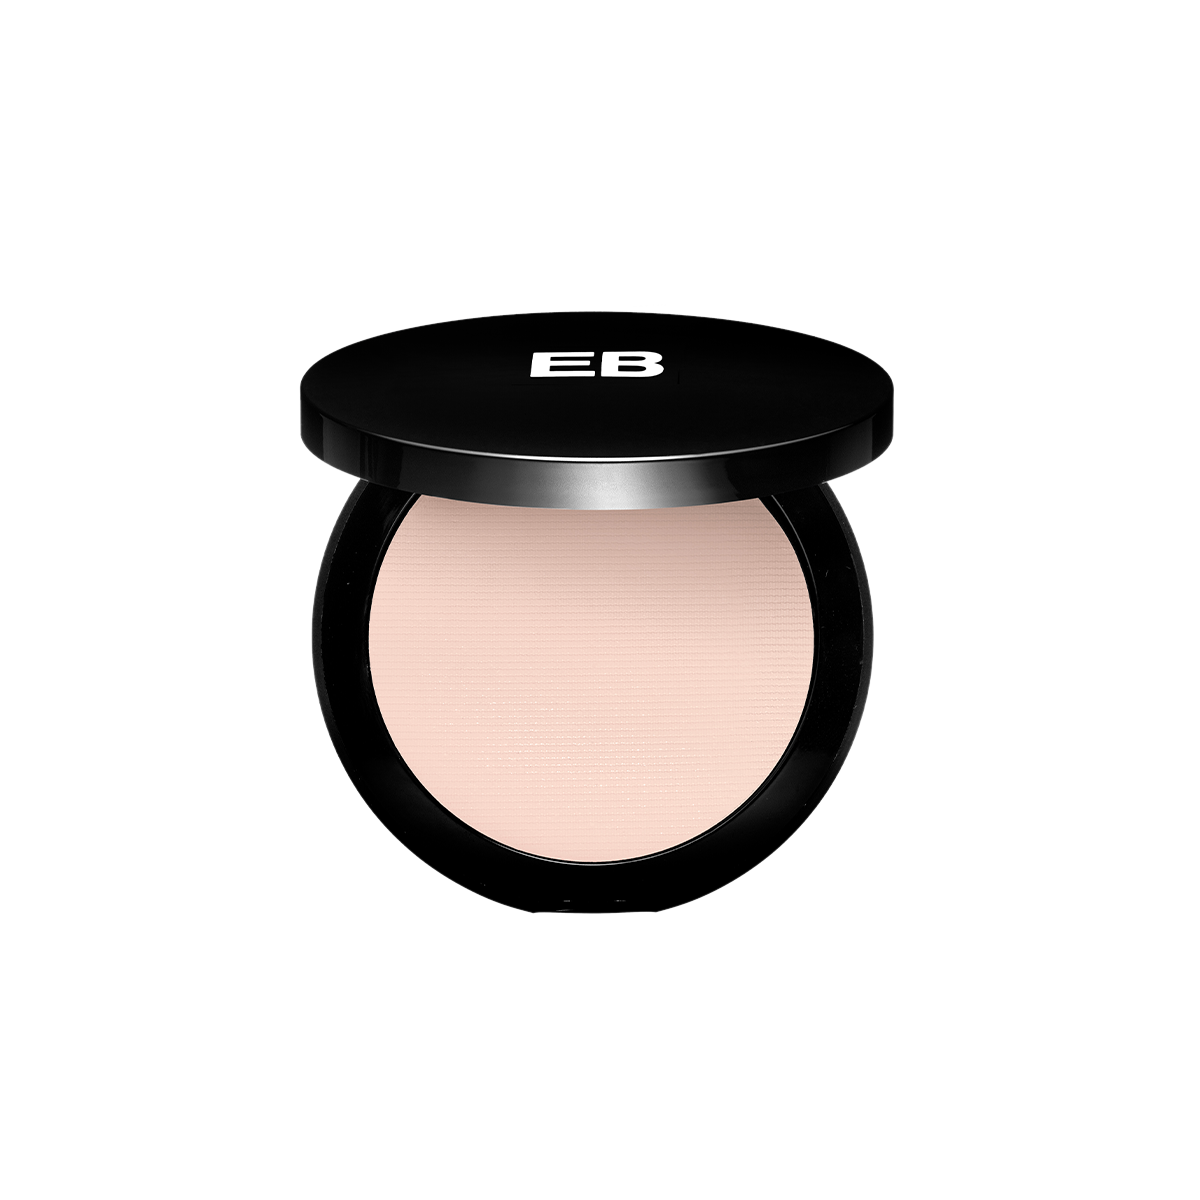 Flawless Illusion Compact Foundation <br> 01 Fair